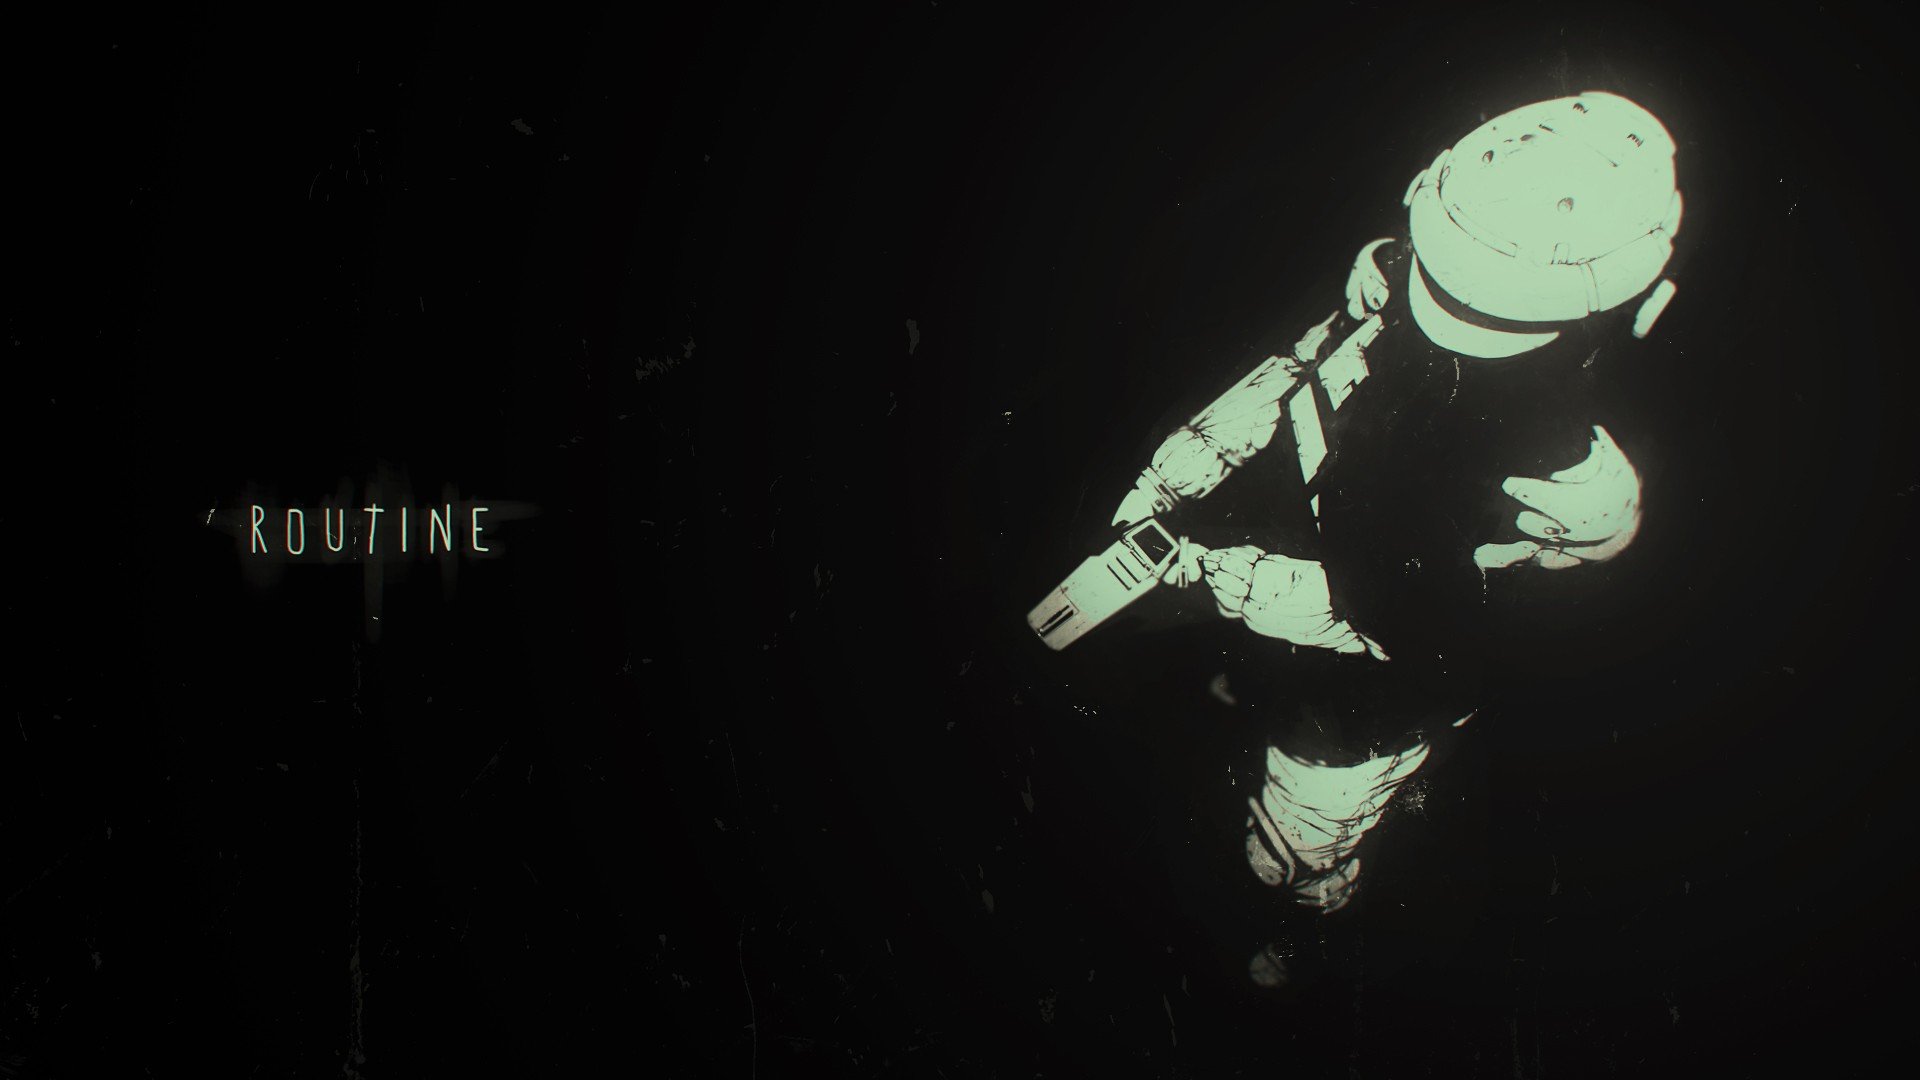 video games, Space, Routine (Video Game) Wallpaper